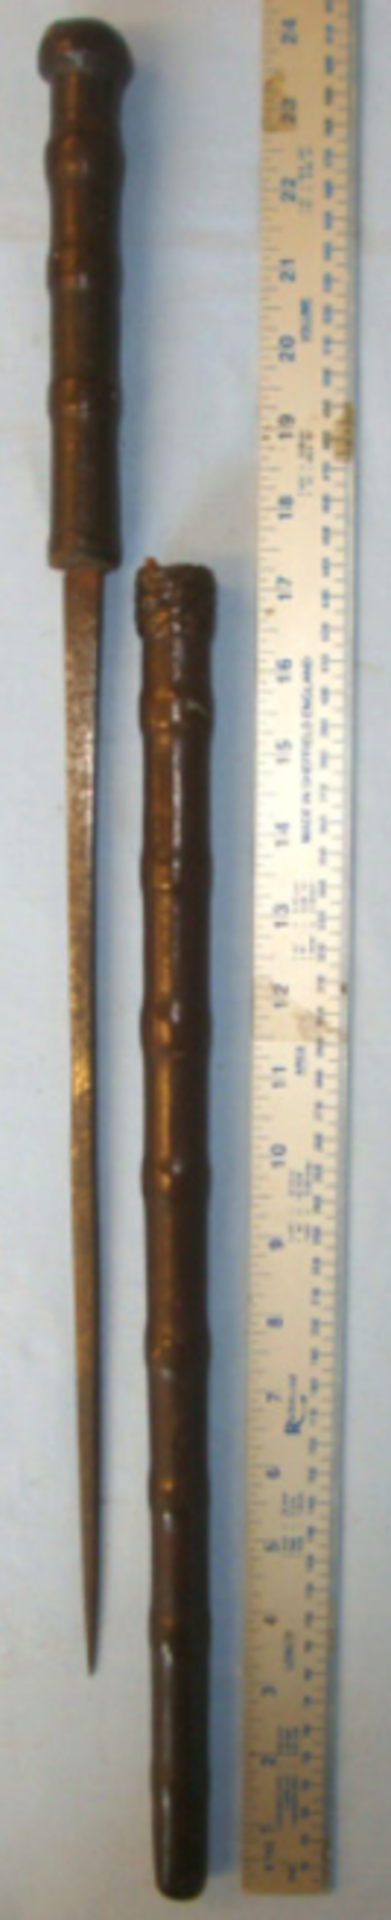 Late Victorian/ Boer War Era British Officer's Brown Leather Covered Wood Swagger Sword Stick With